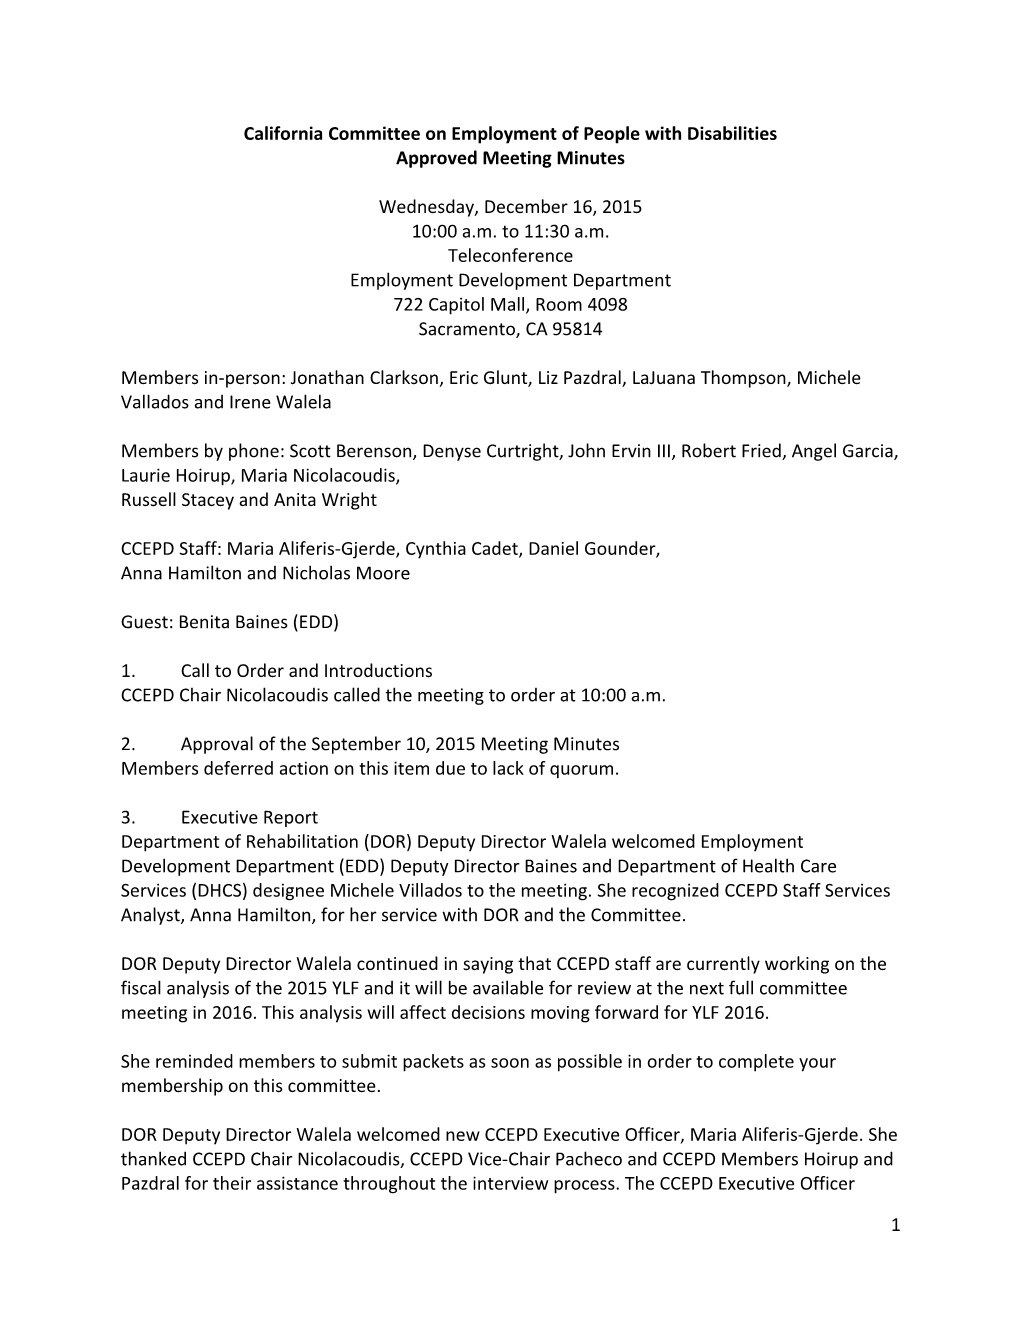 California Committee on Employment of People with Disabilities Approved Meeting Minutes